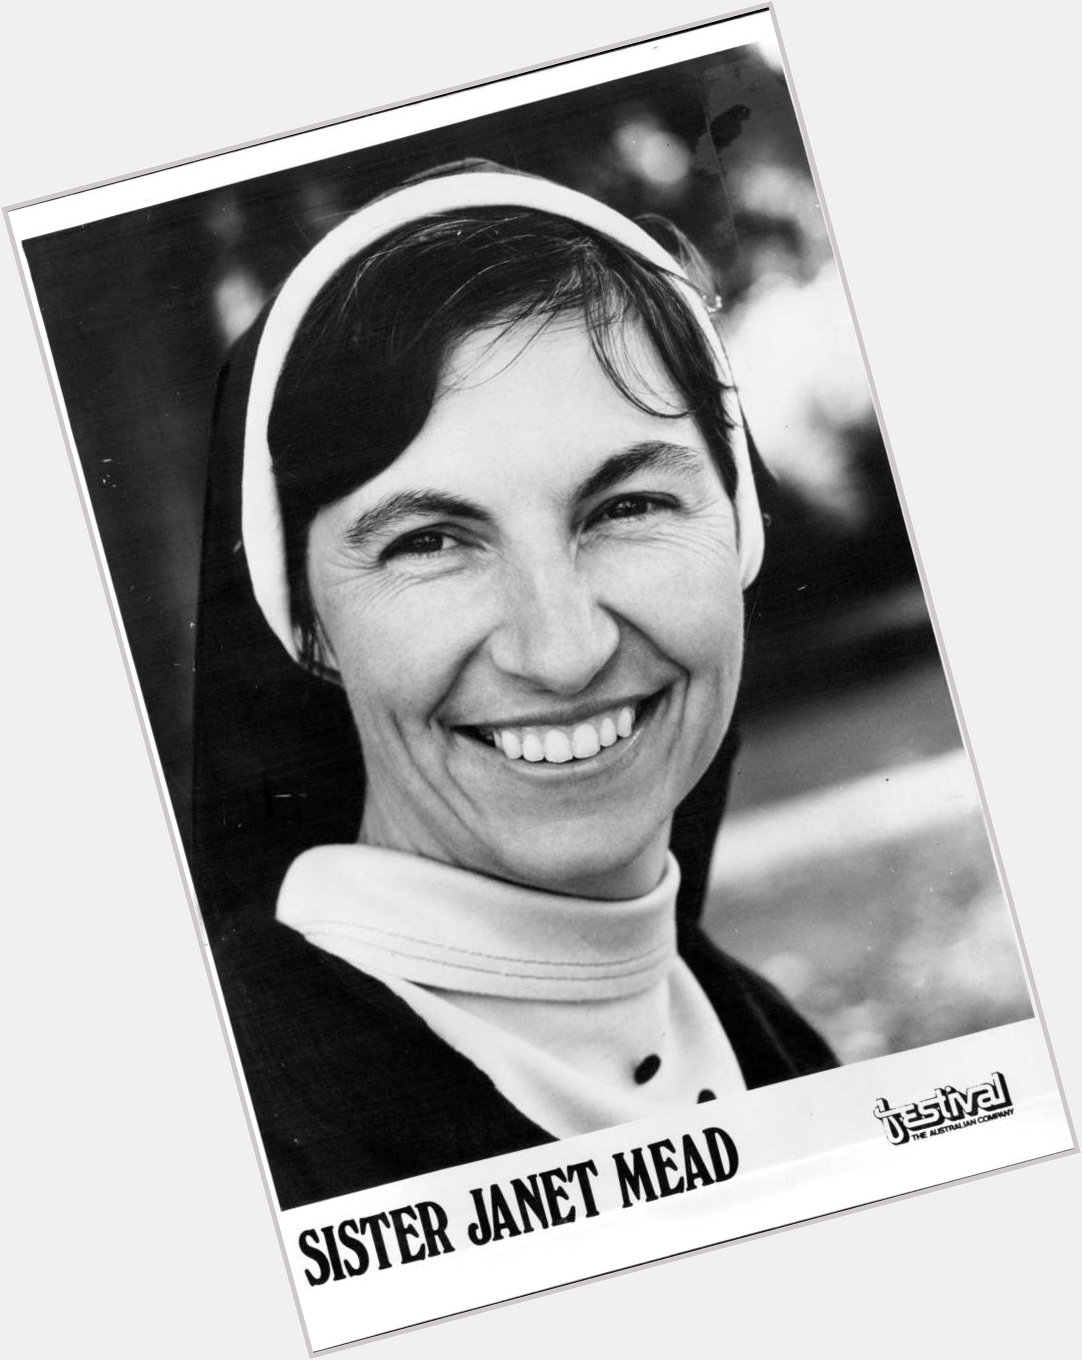 Sister Janet Mead  